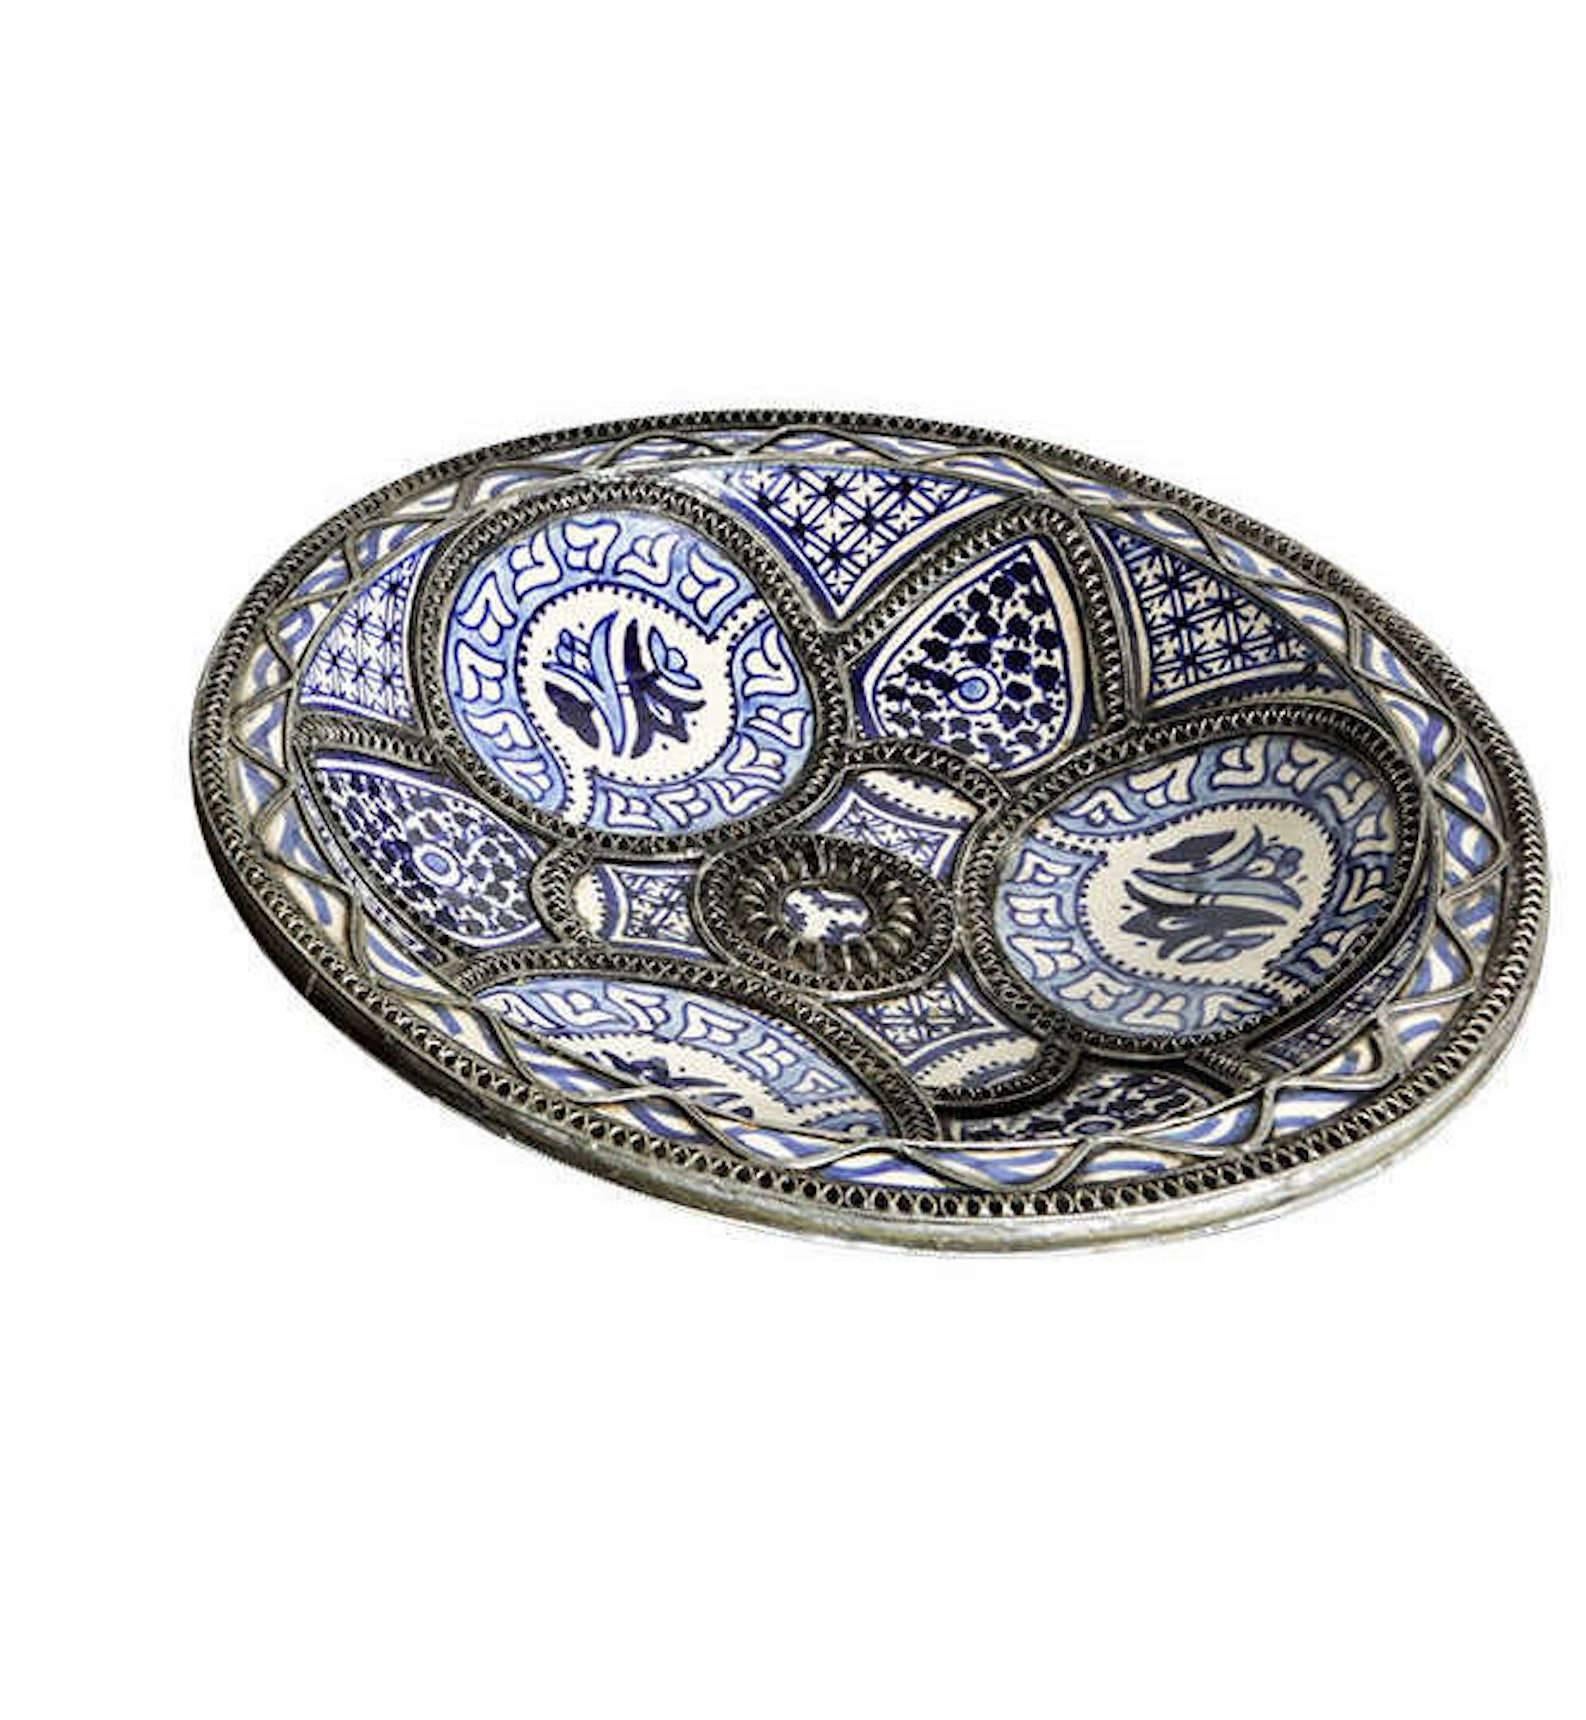 Handcrafted large Moroccan blue and white decorative ceramic plate from Fez. Bleu de Fez, very nice designs hand-painted by artist in Fez.
Geometrical and floral designs and adorned with nickel silver filigree designs.